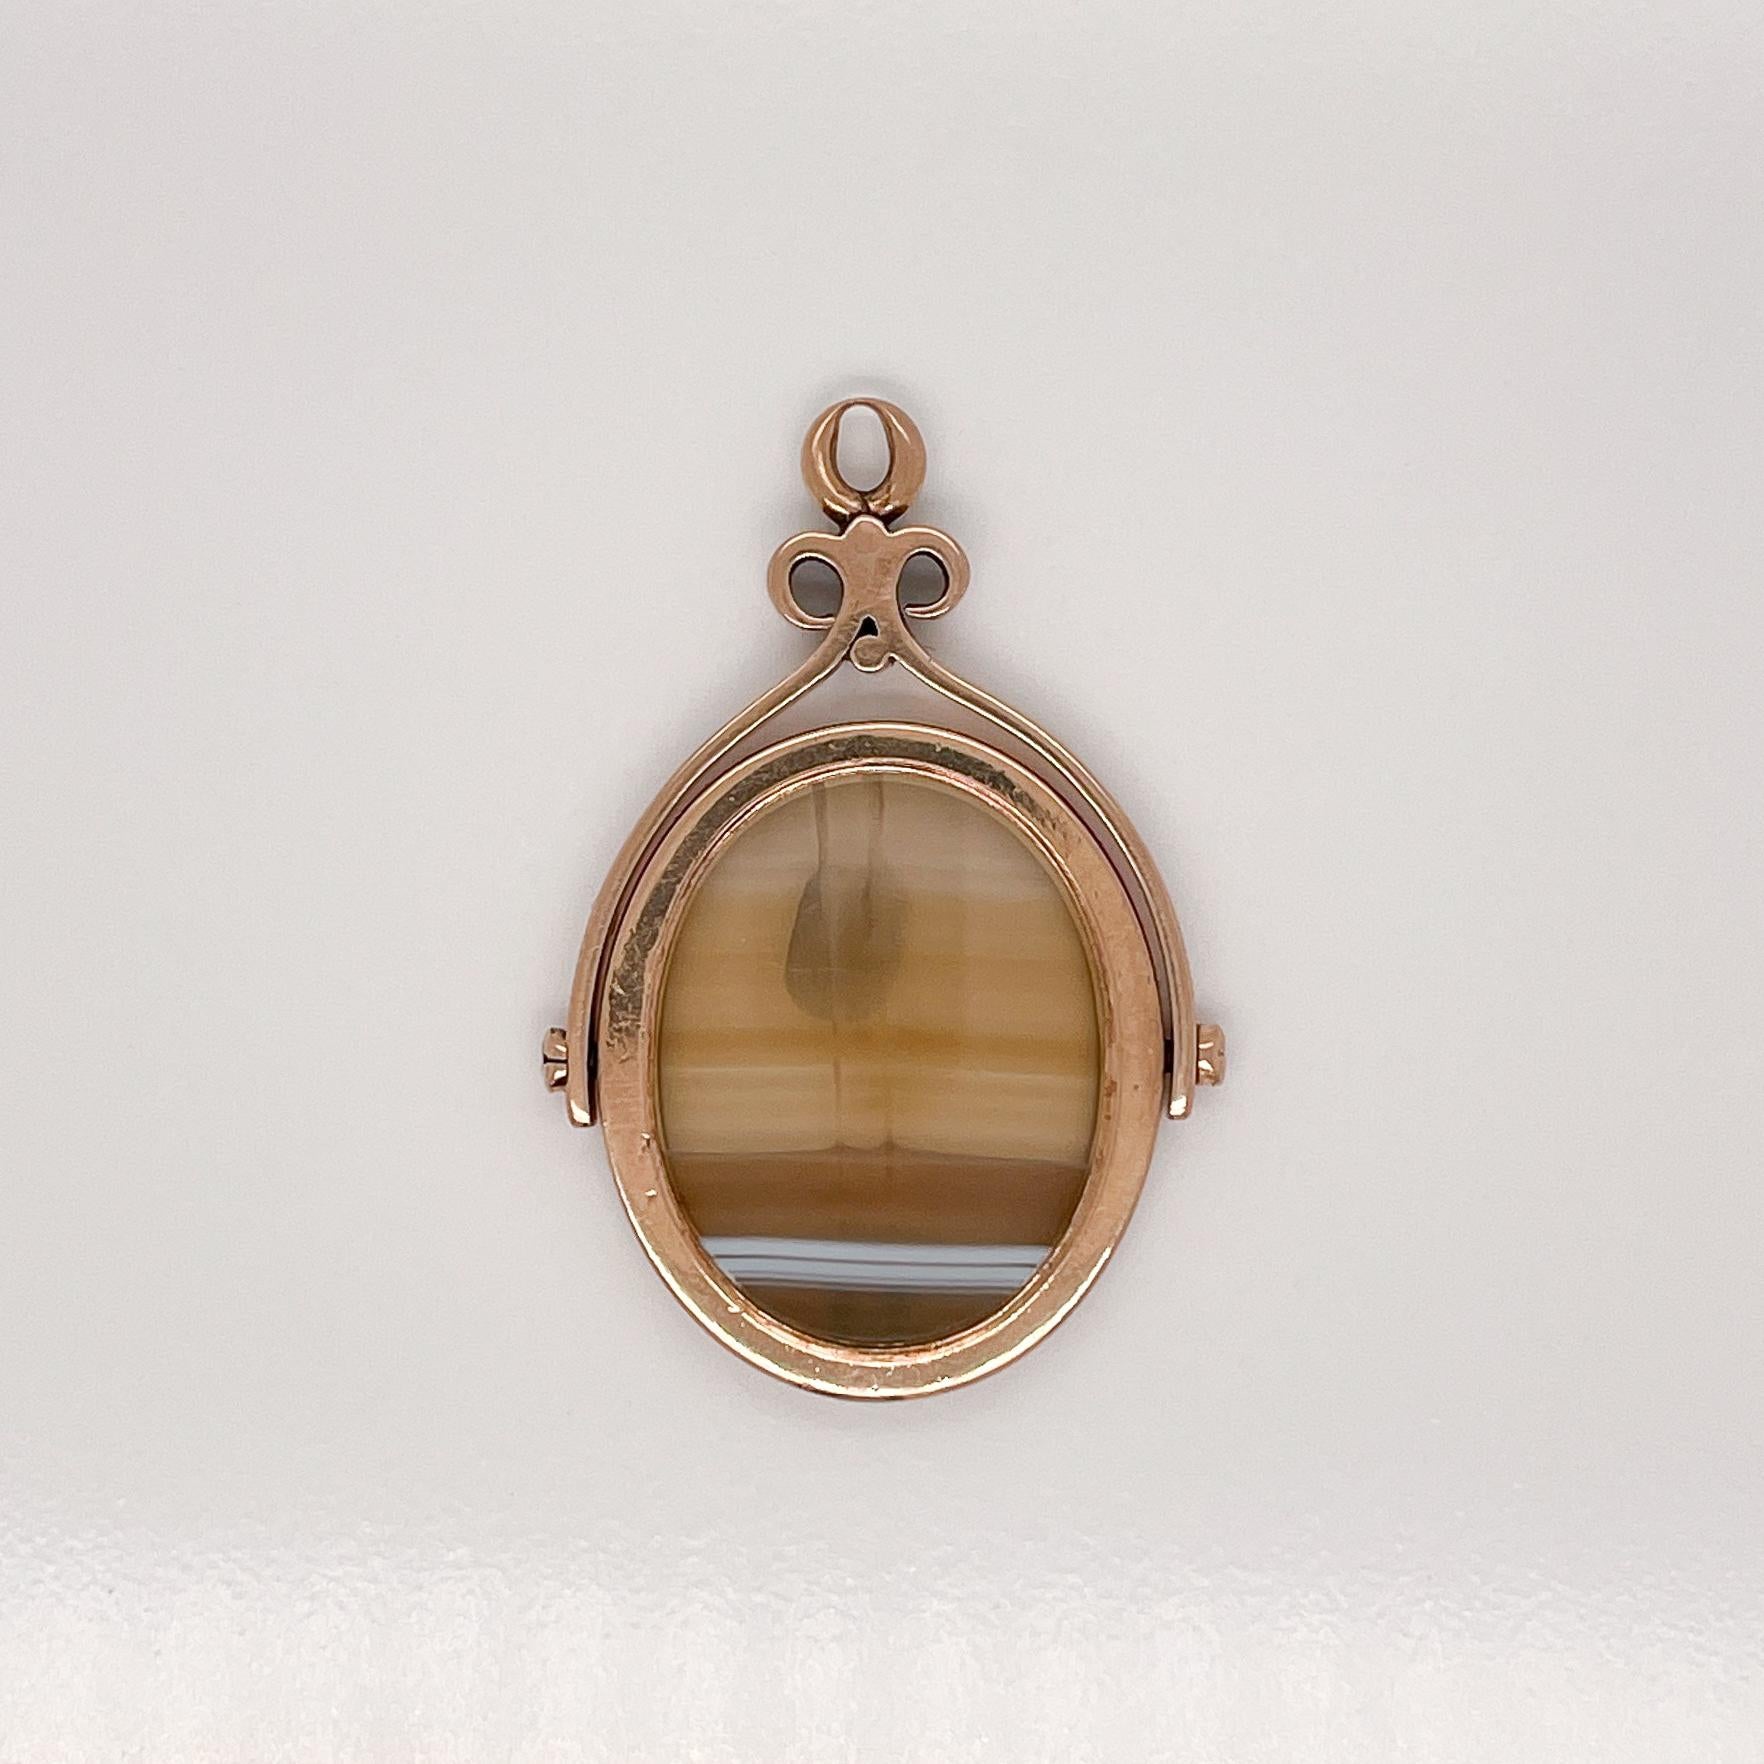 A very fine antique gold & agate spinner charm pendant.

With a smooth oval slice of agate bezel-set in 14k gold and a hinge pinned on each side so that the charm can flip. 

Supported by a scroll shaped frame with bail at top for attaching a chain